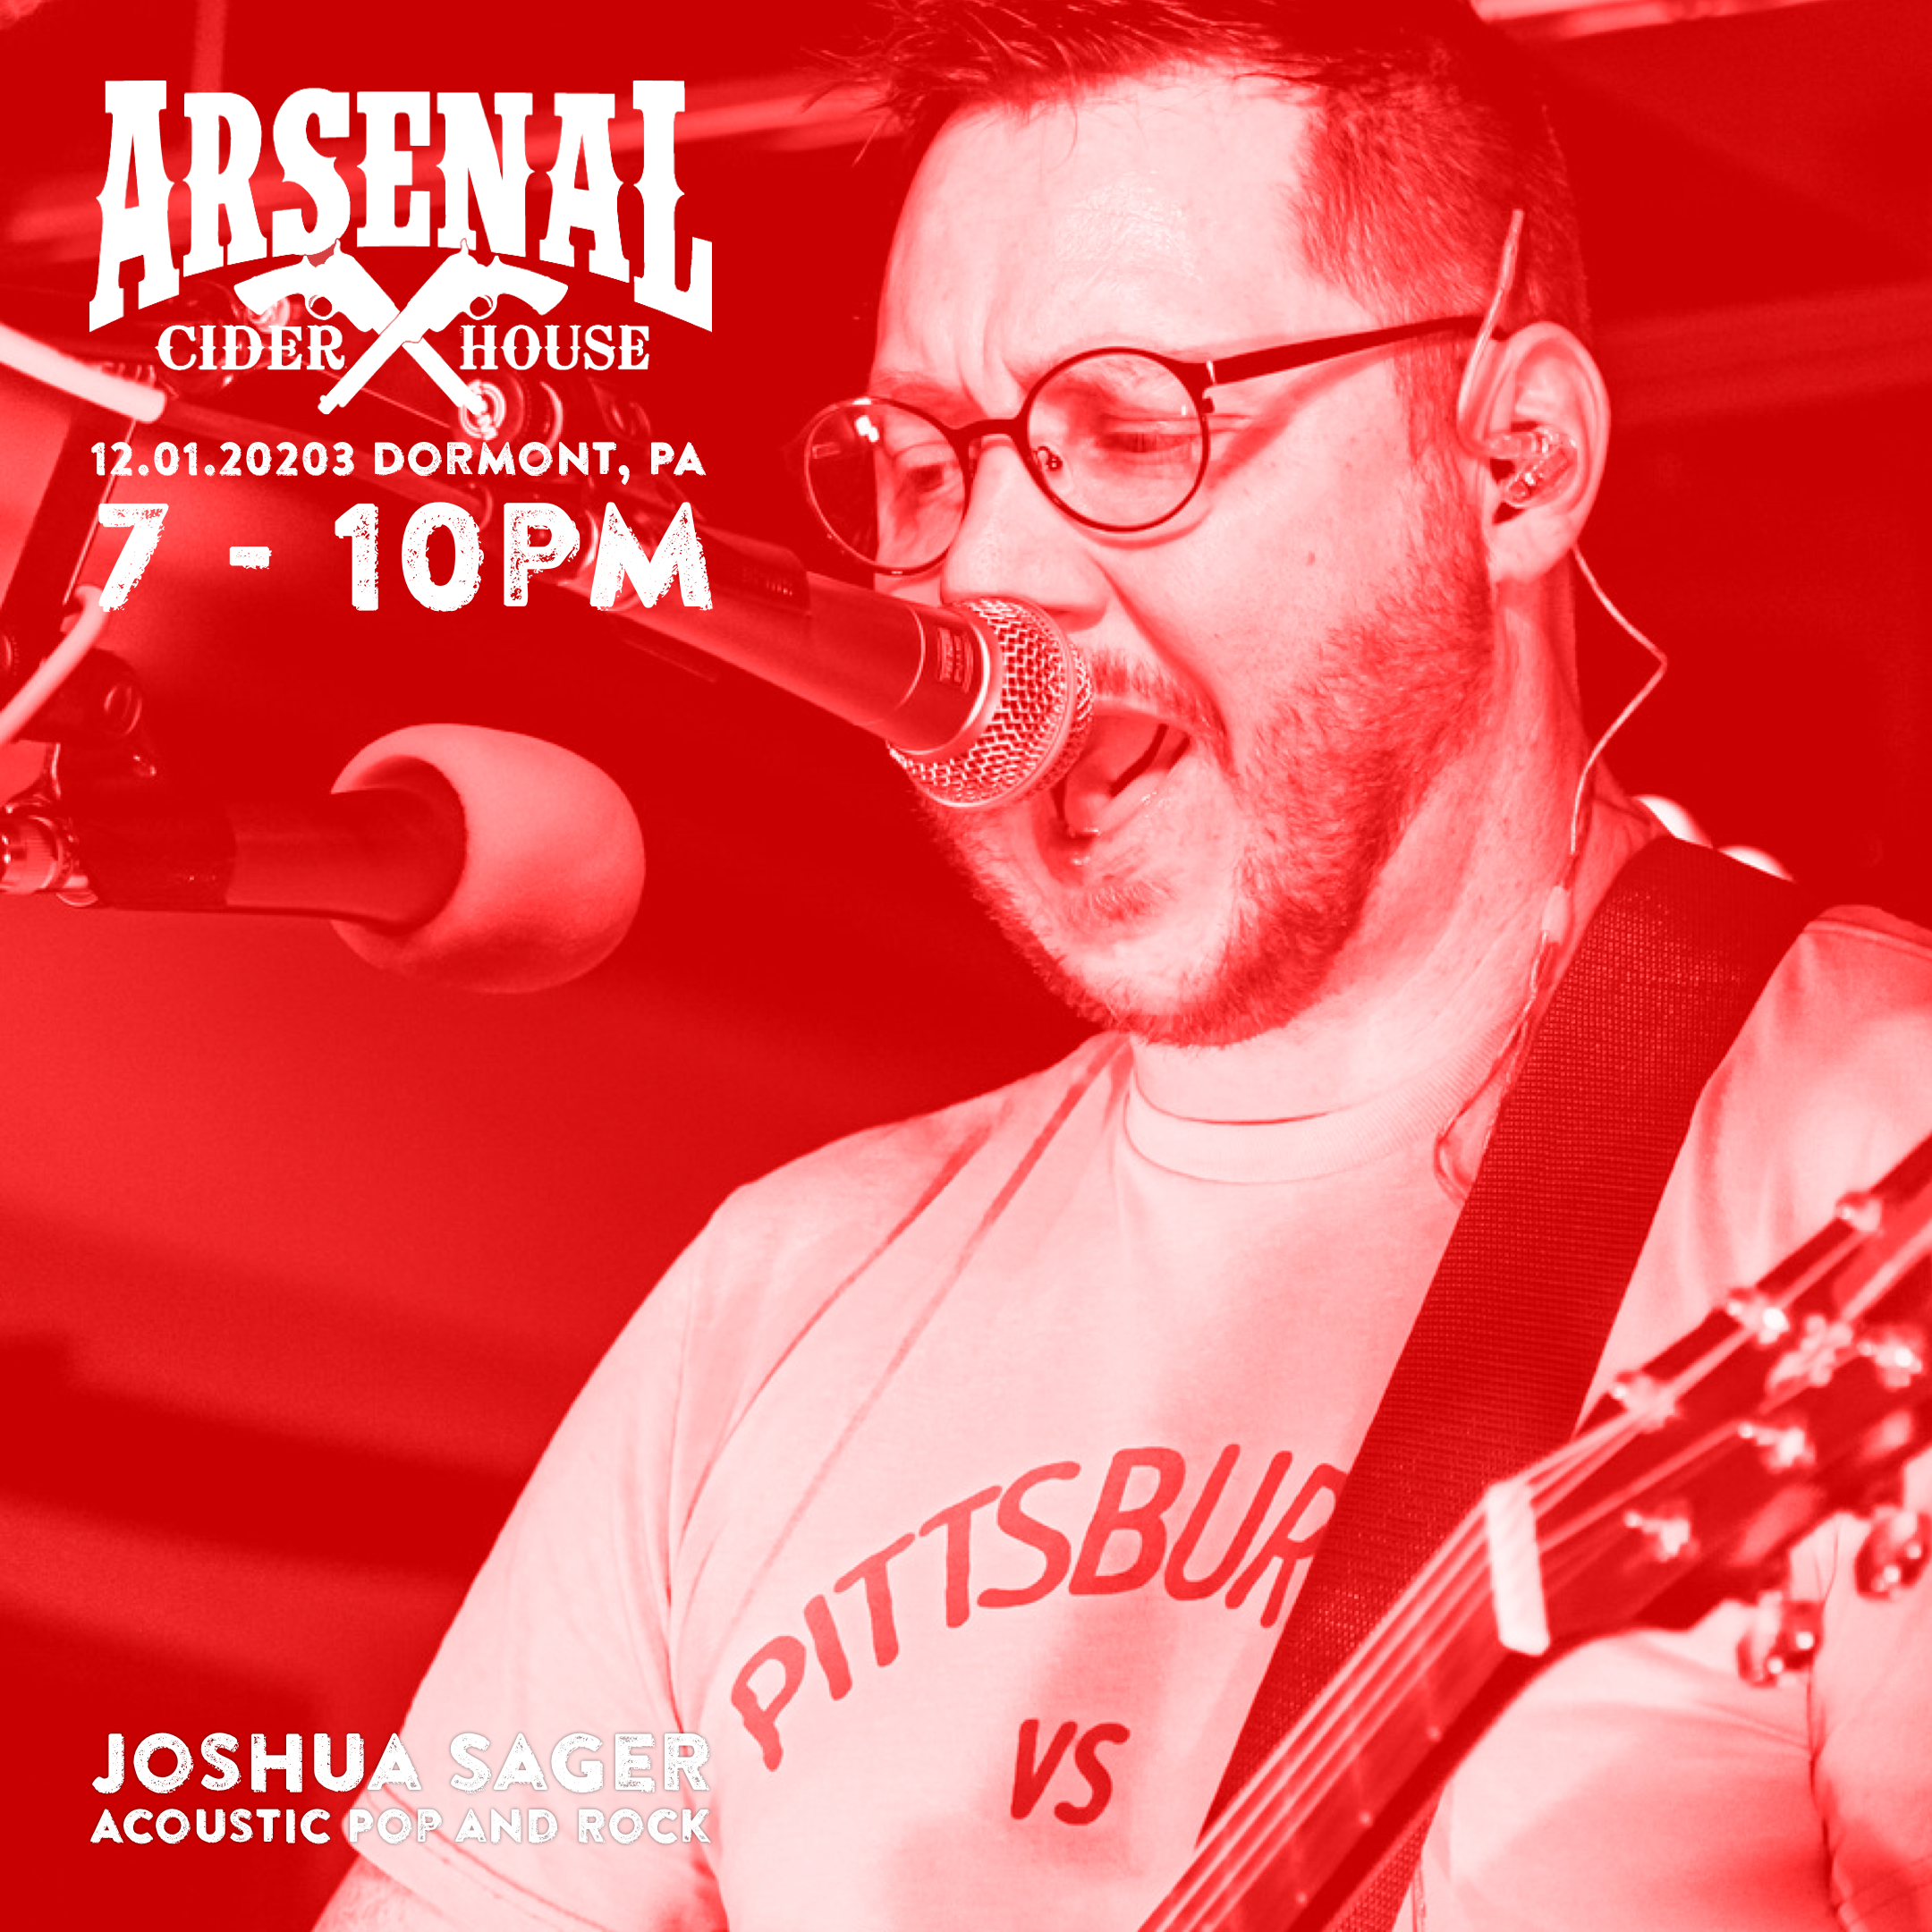 Joshua Sager will be performing at Arsenal Cider in Dormont on December 1st from 7pm - 10pm